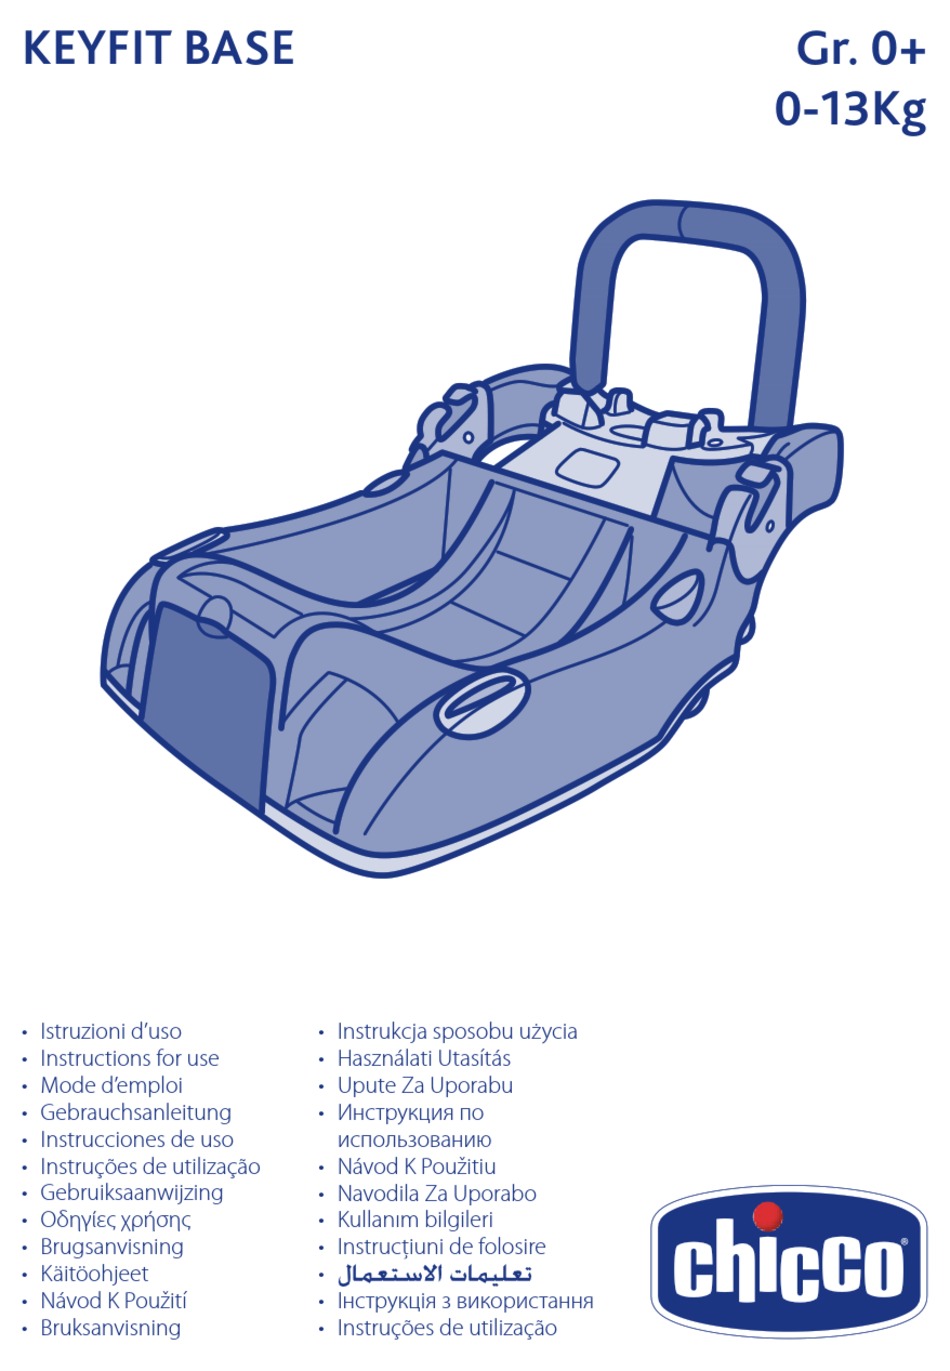 CHICCO KEYFIT BASE INSTRUCTIONS FOR USE MANUAL Pdf Download | ManualsLib